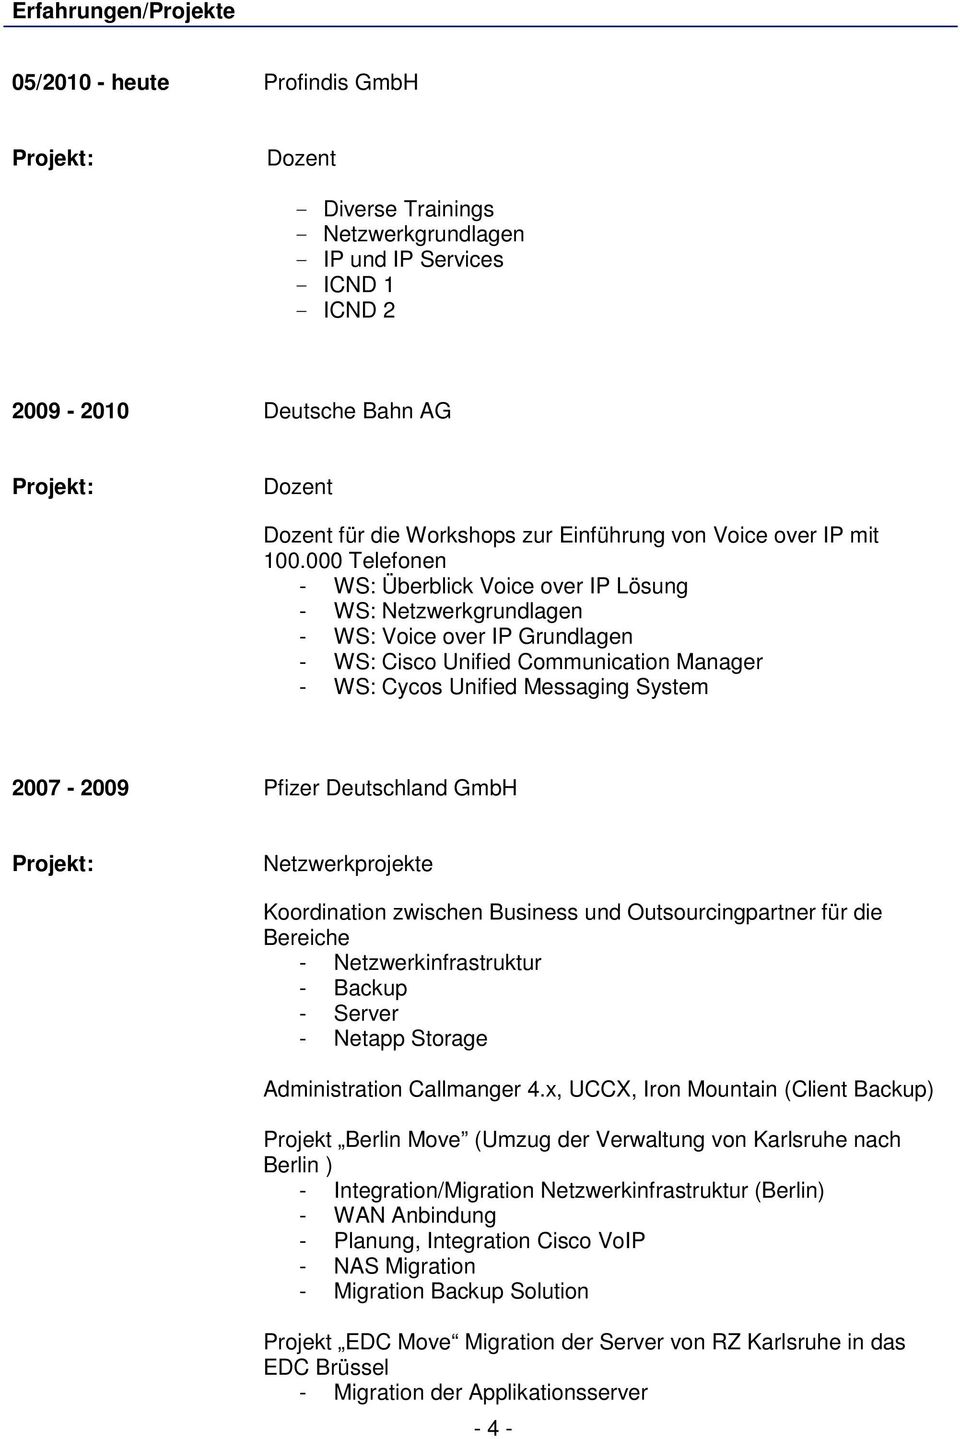 000 Telefonen - WS: Überblick Voice over IP Lösung - WS: Netzwerkgrundlagen - WS: Voice over IP Grundlagen - WS: Cisco Unified Communication Manager - WS: Cycos Unified Messaging System 2007-2009